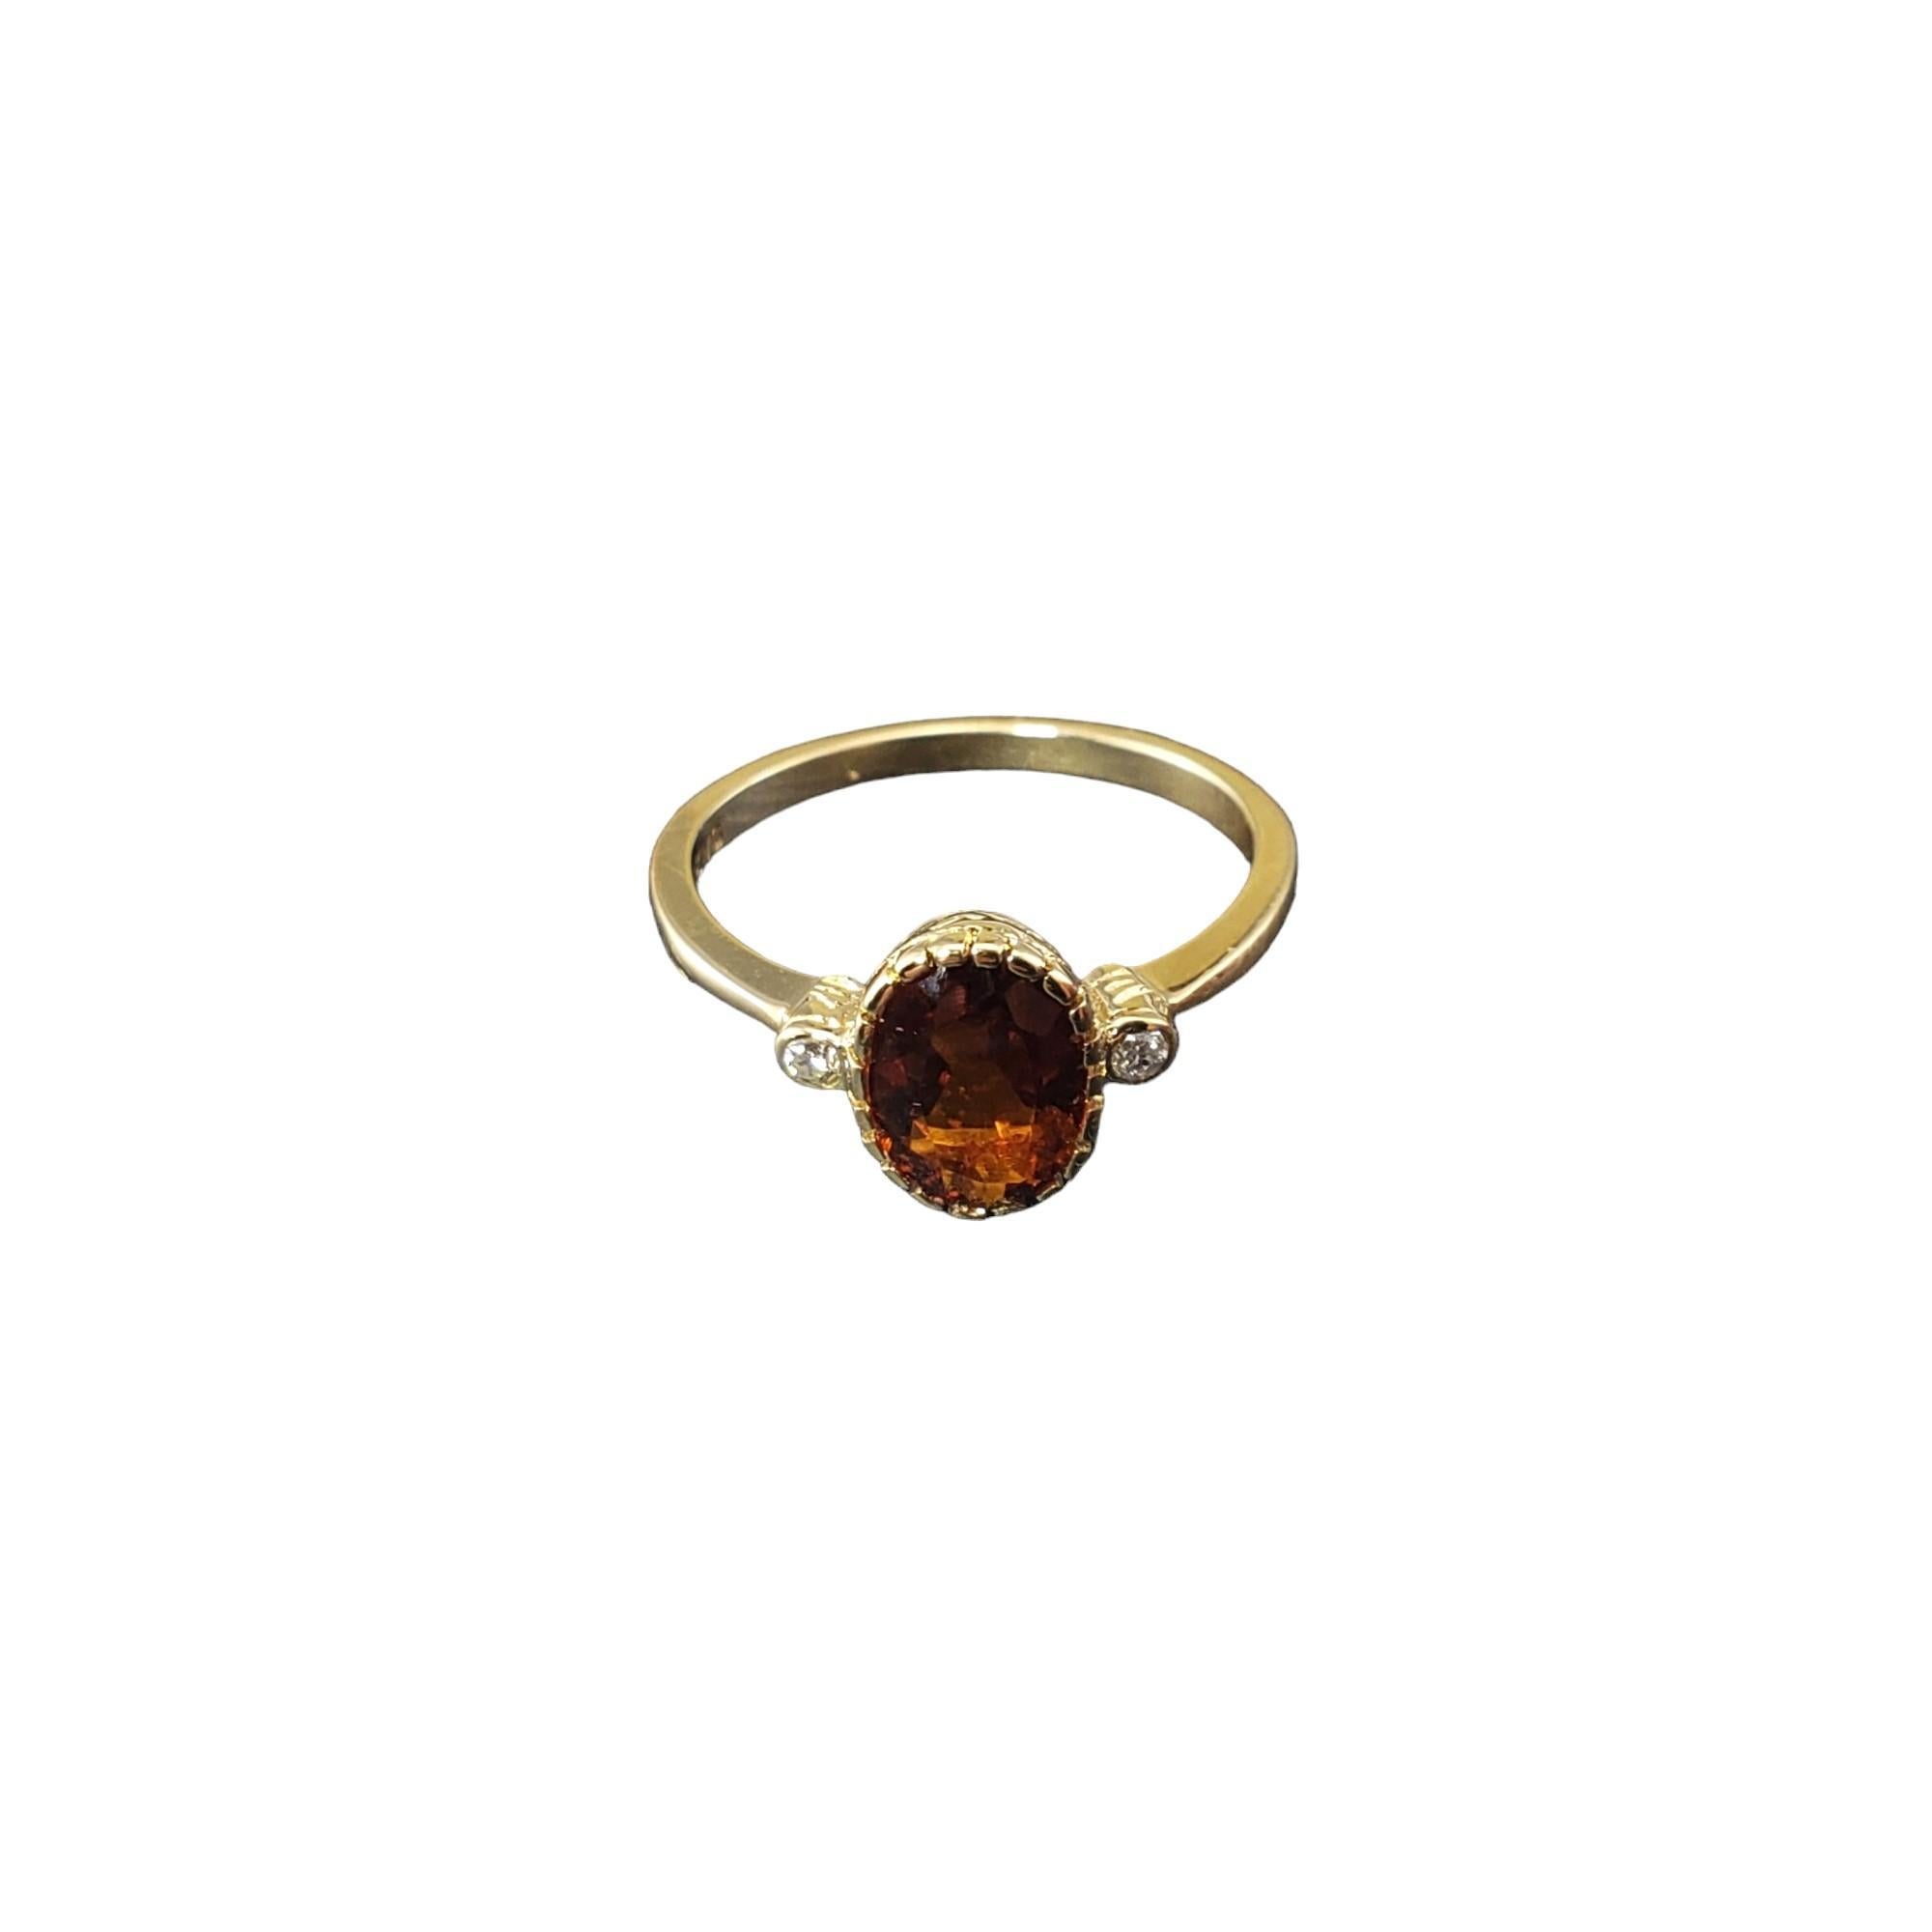 14 Karat Yellow Gold and Citrine Ring Size 6.25

This lovely ring features one oval citrine stone (9 mm x 7 mm) and two round brilliant cut diamonds set in classic 14K yellow gold.  

Shank: 1.5 mm.

Approximate total diamond weight: .04